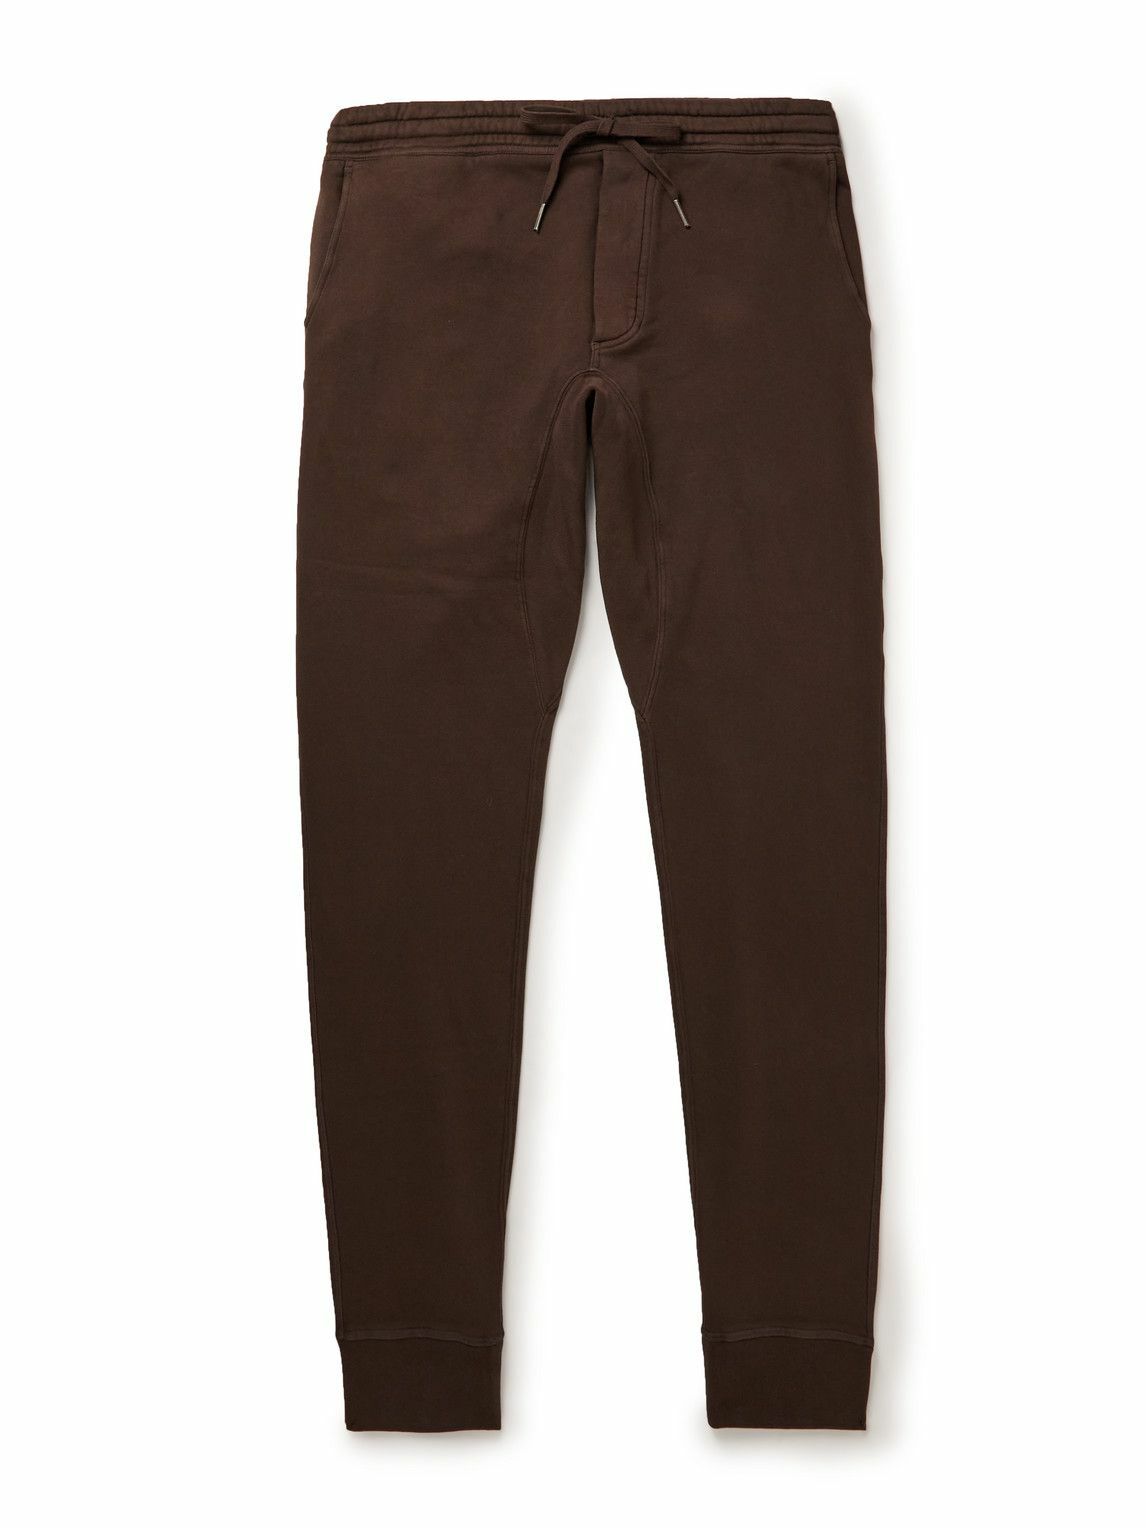 TOM FORD - Tapered Garment-Dyed Cotton-Jersey Sweatpants - Brown TOM FORD